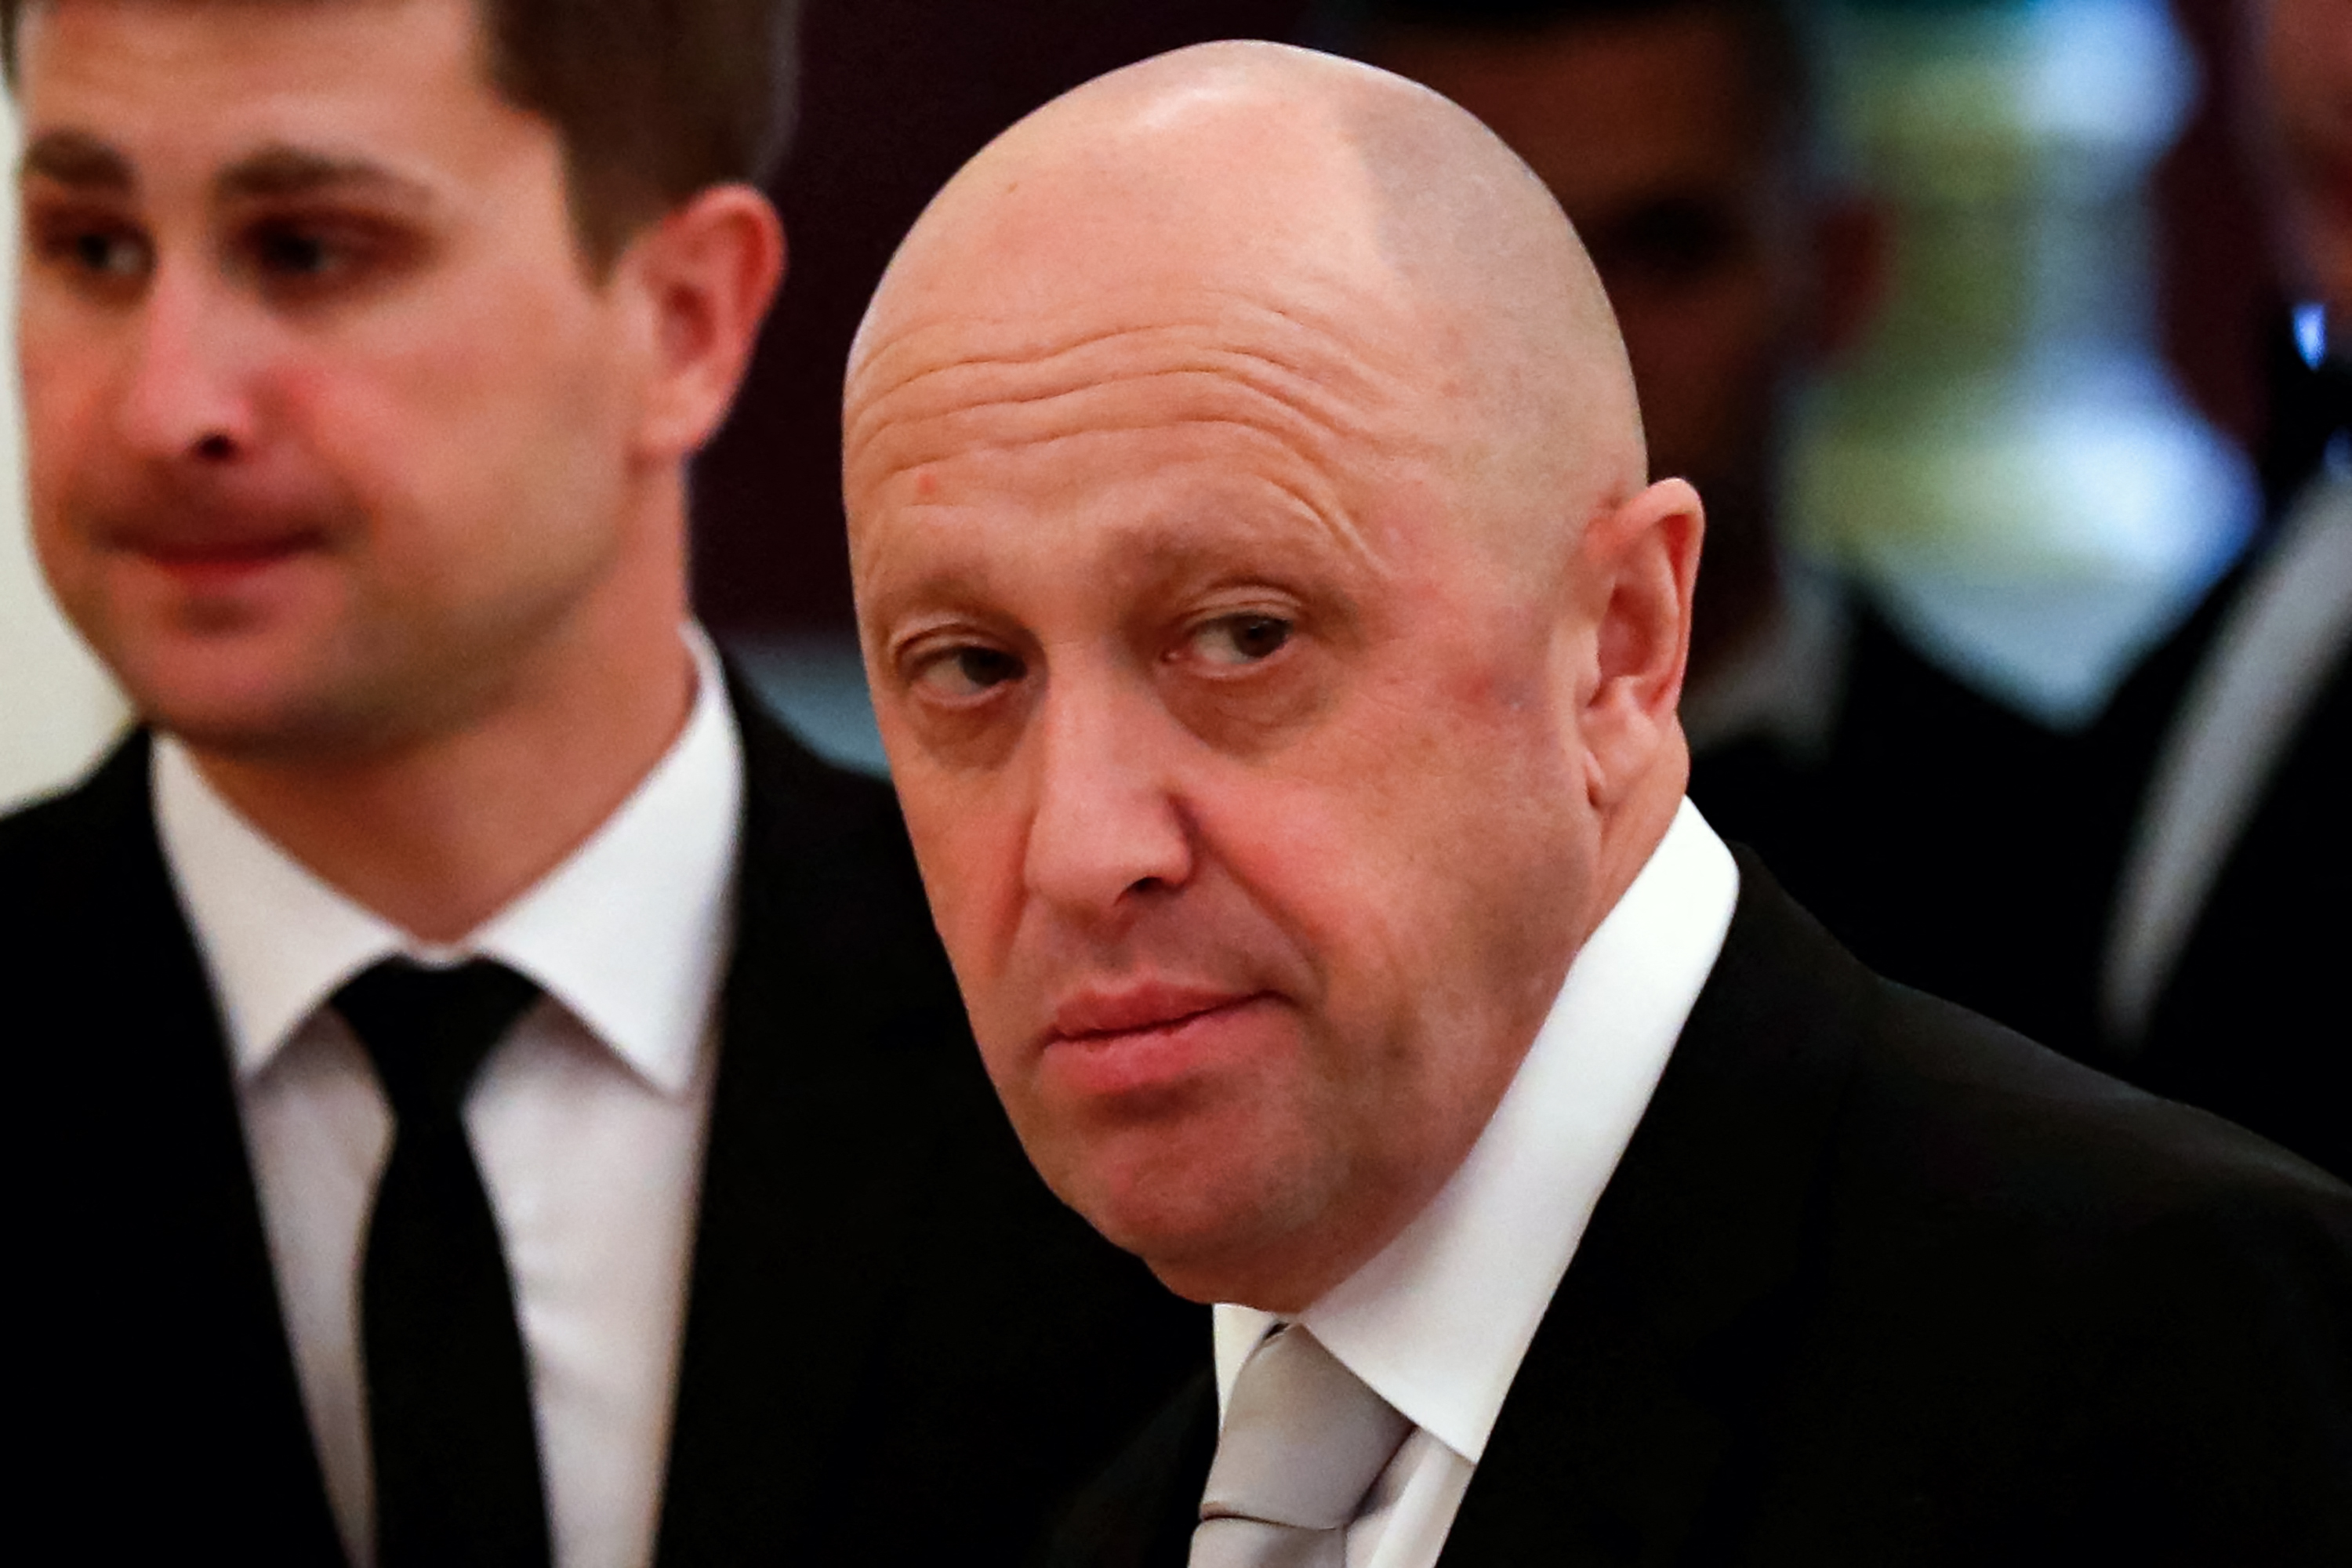 Prigozhin accuses Putin’s military leaders of “genocide” against Russians